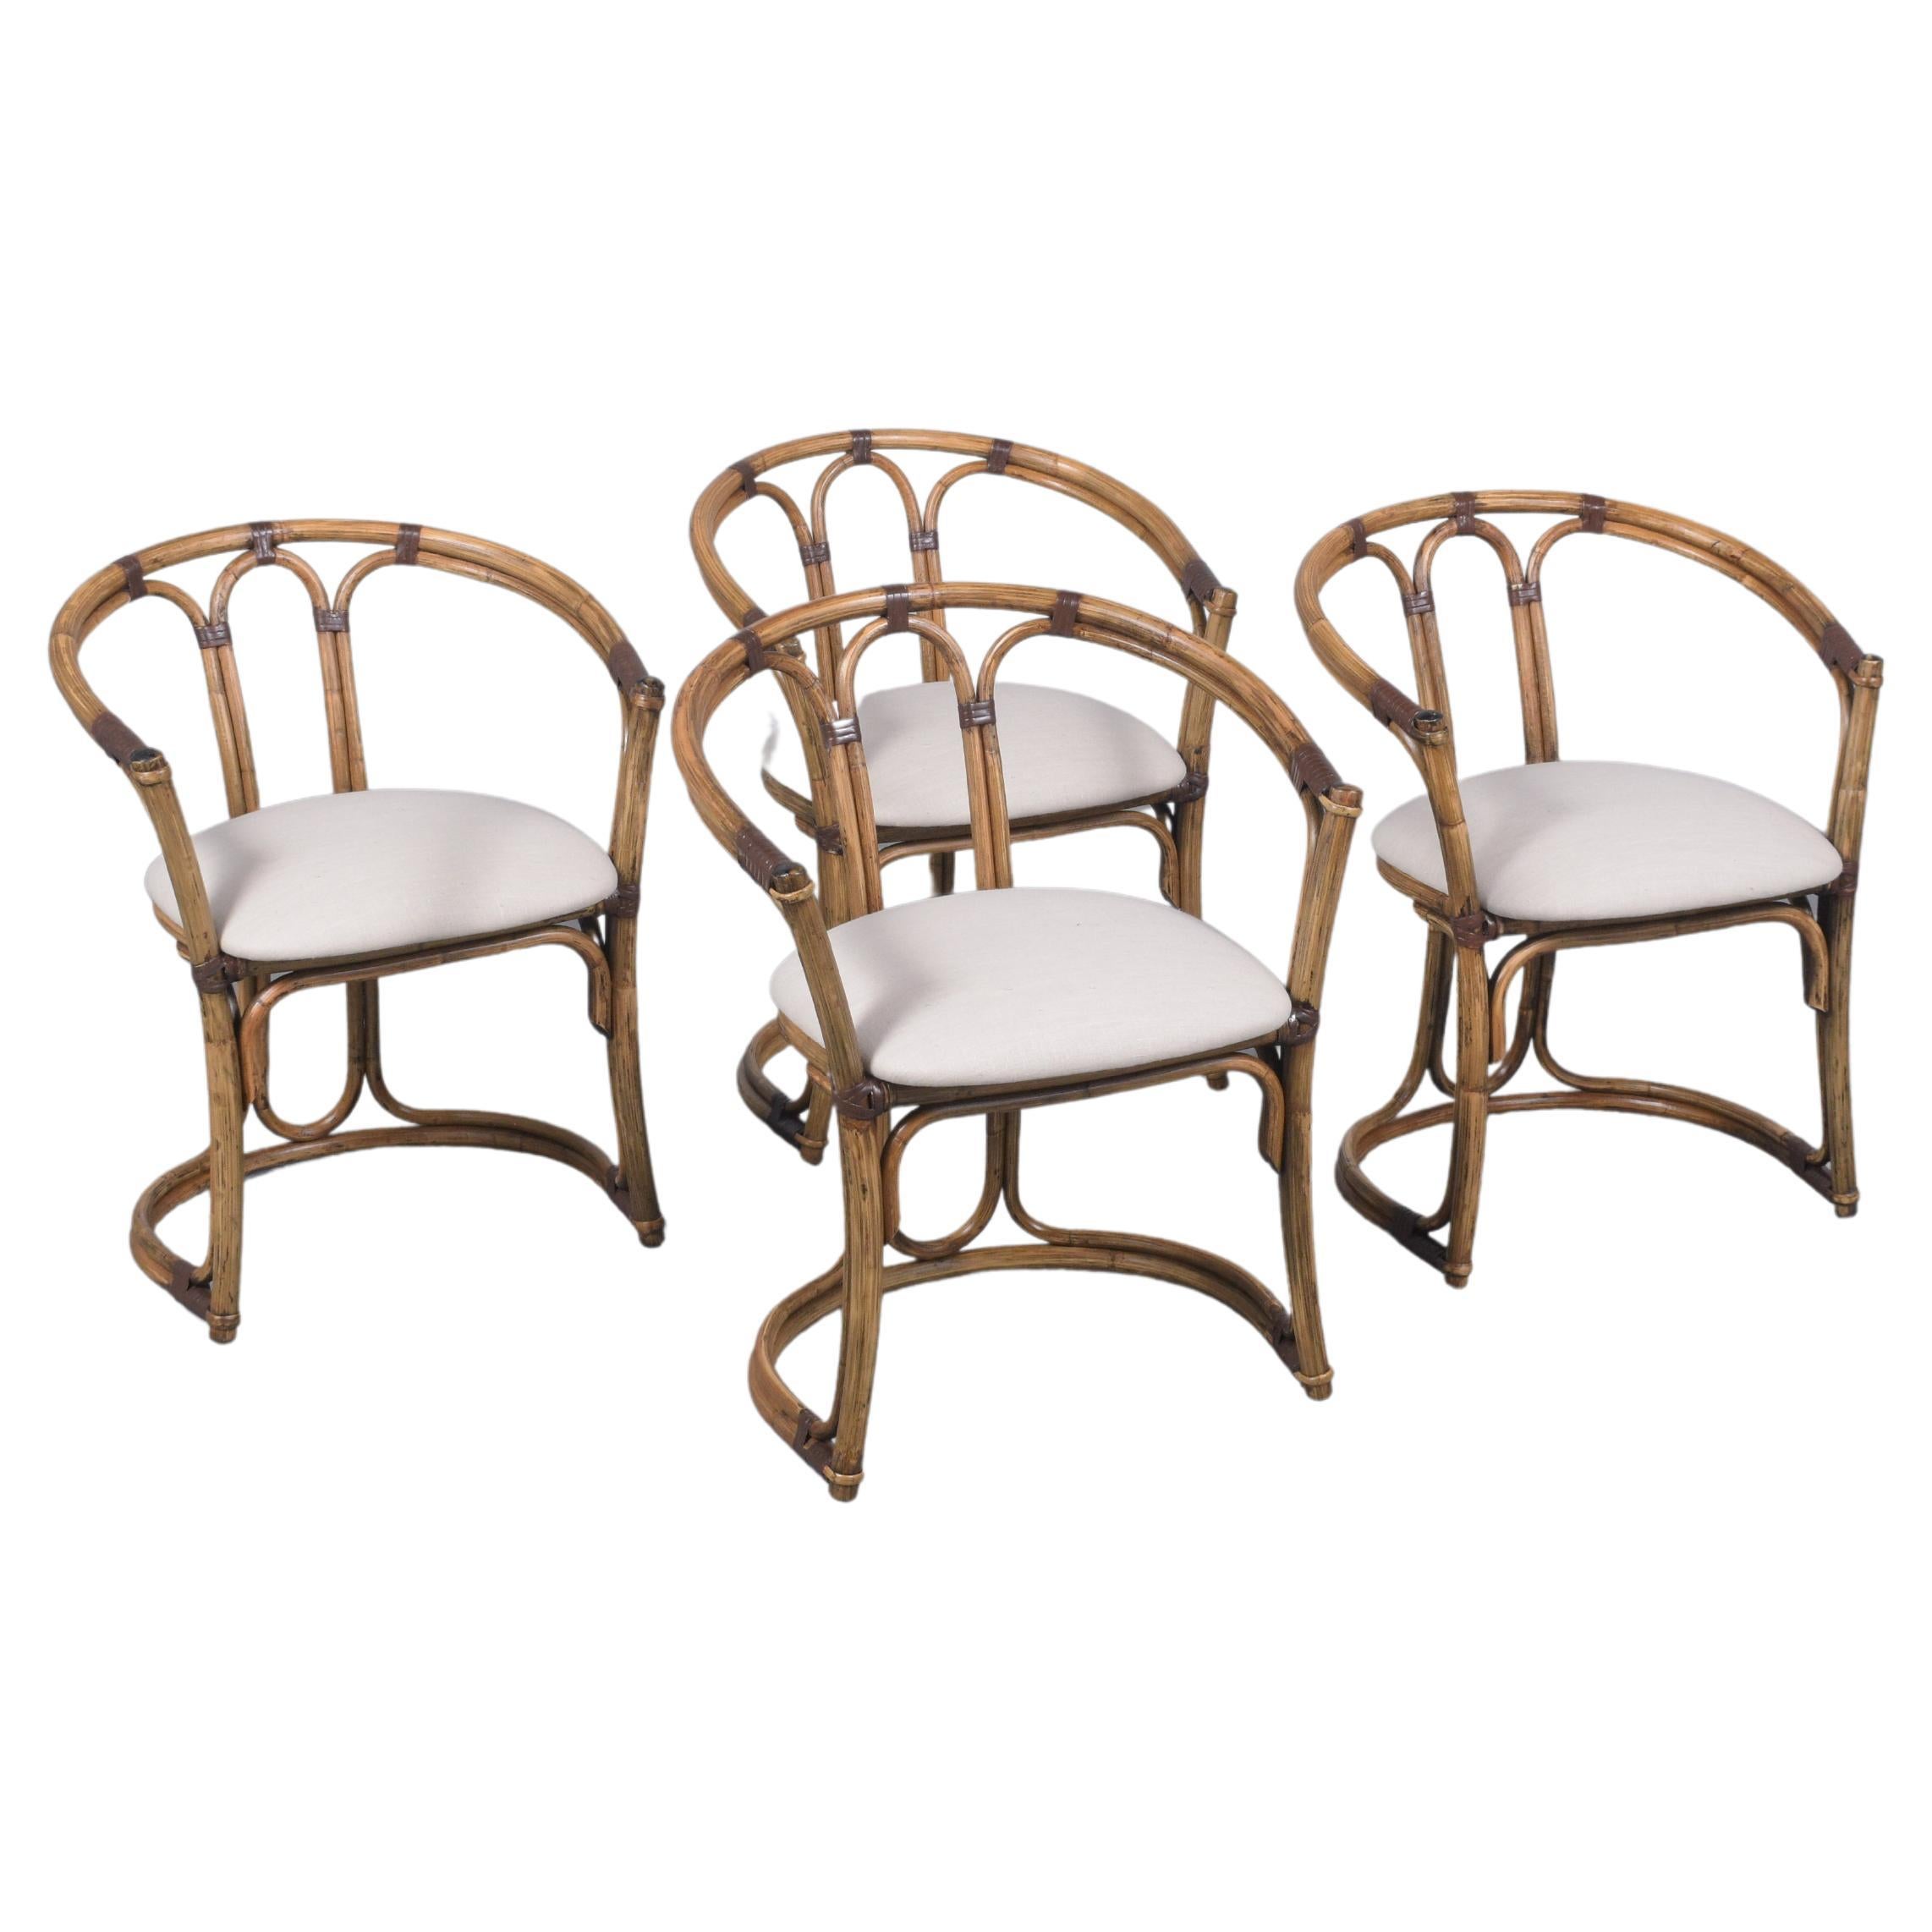 Discover the charm of our set of four vintage bamboo barrel chairs, exquisitely crafted and fully restored by our in-house professionals. These chairs feature a natural bamboo color accented with brown details and a protective satin lacquer finish.